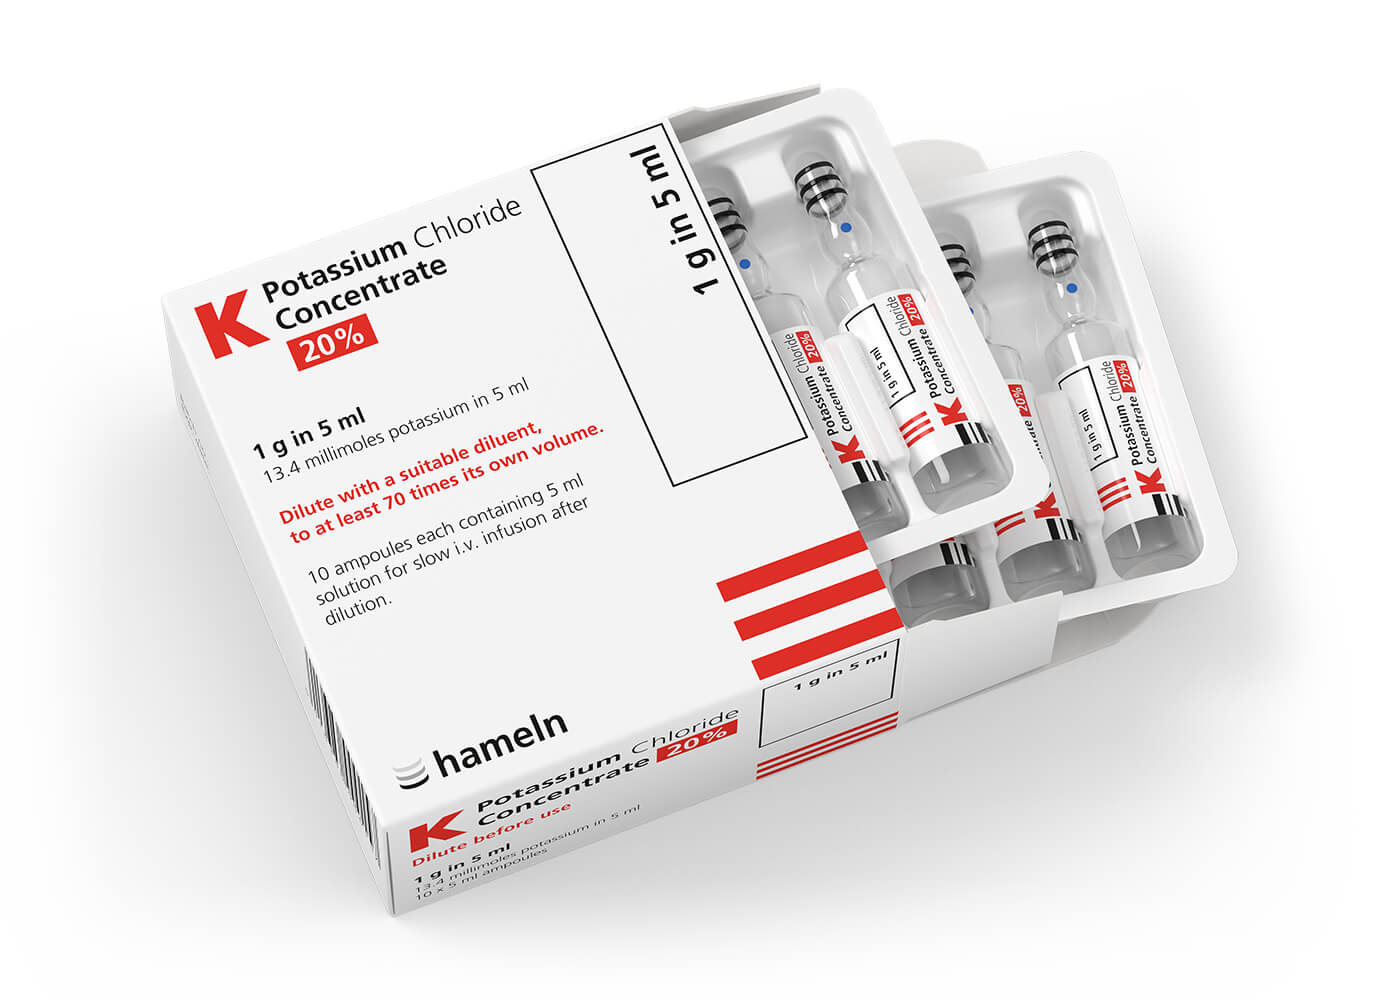 PotassiumChloride_UK_20pc_in_5_ml_Pack-Amp_10St_2020-14